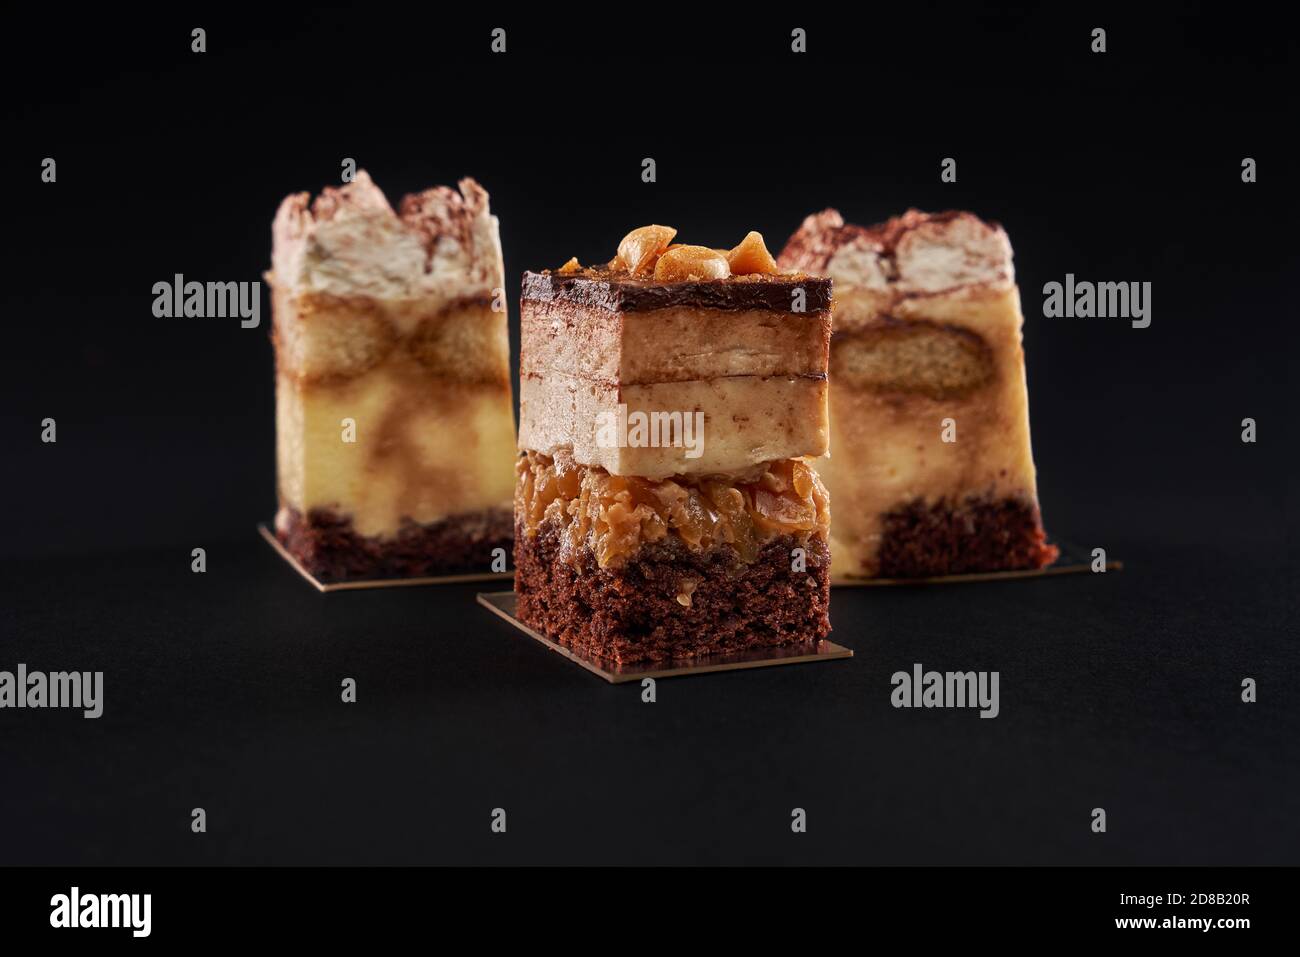 Tiramisu Cake With Three Layers Of Chocolate Biscuit And Natural Coffee Syrup With Cognac And Cream Three Square Pieces In Row Decorated With Whipped Cream And Cocoa Isolated On Black Background Stock